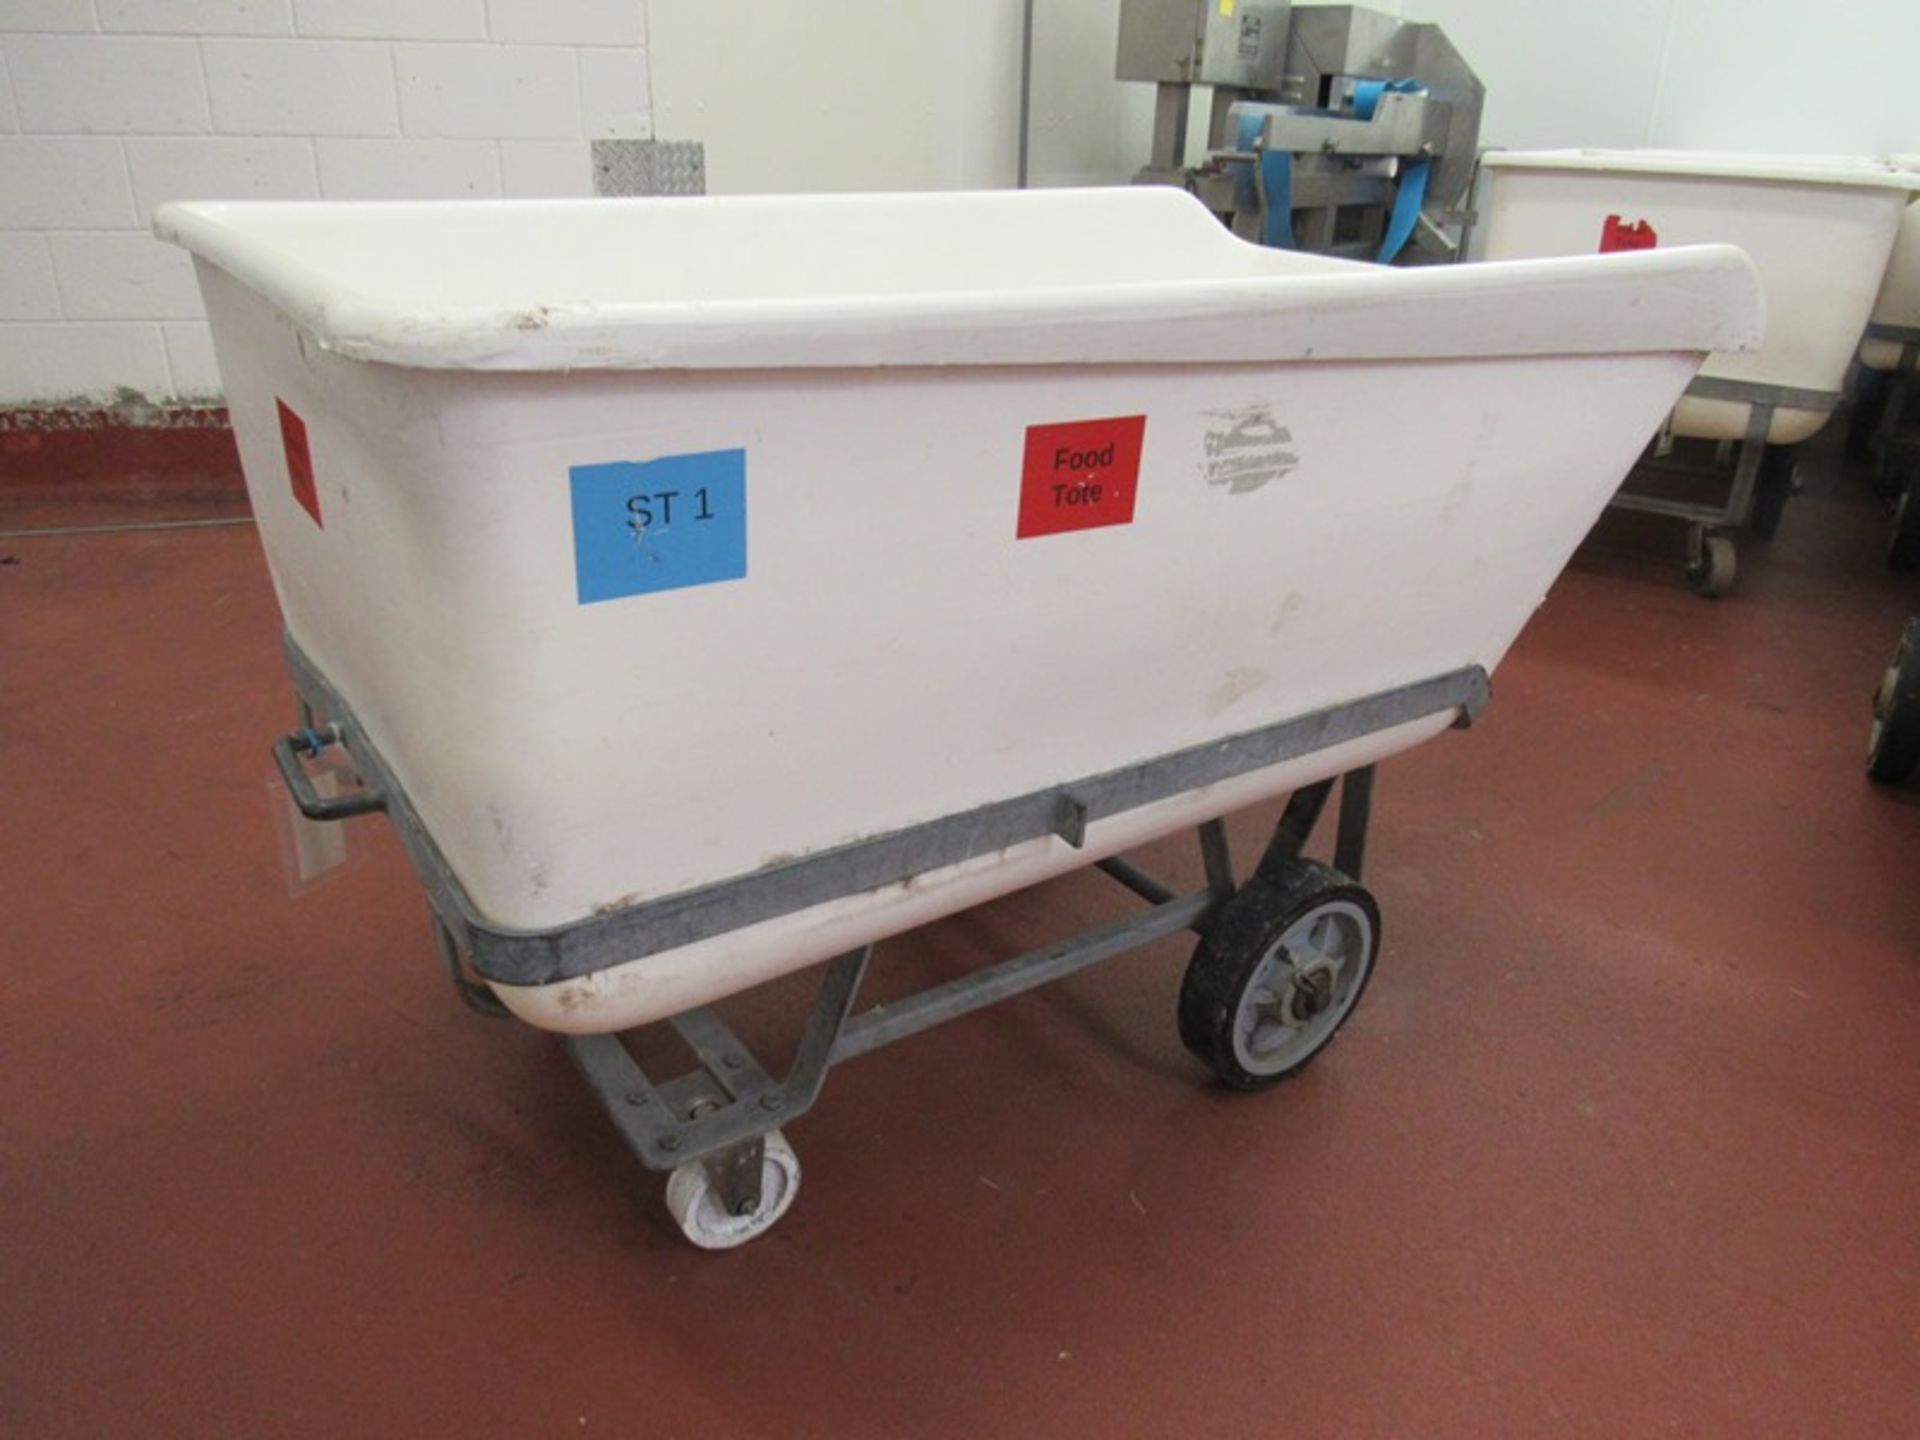 Remco Mdl. 6901 Plastic Food Totes on stainless steel cart, 33" W X 54" L X 20" D (Required - Image 2 of 3